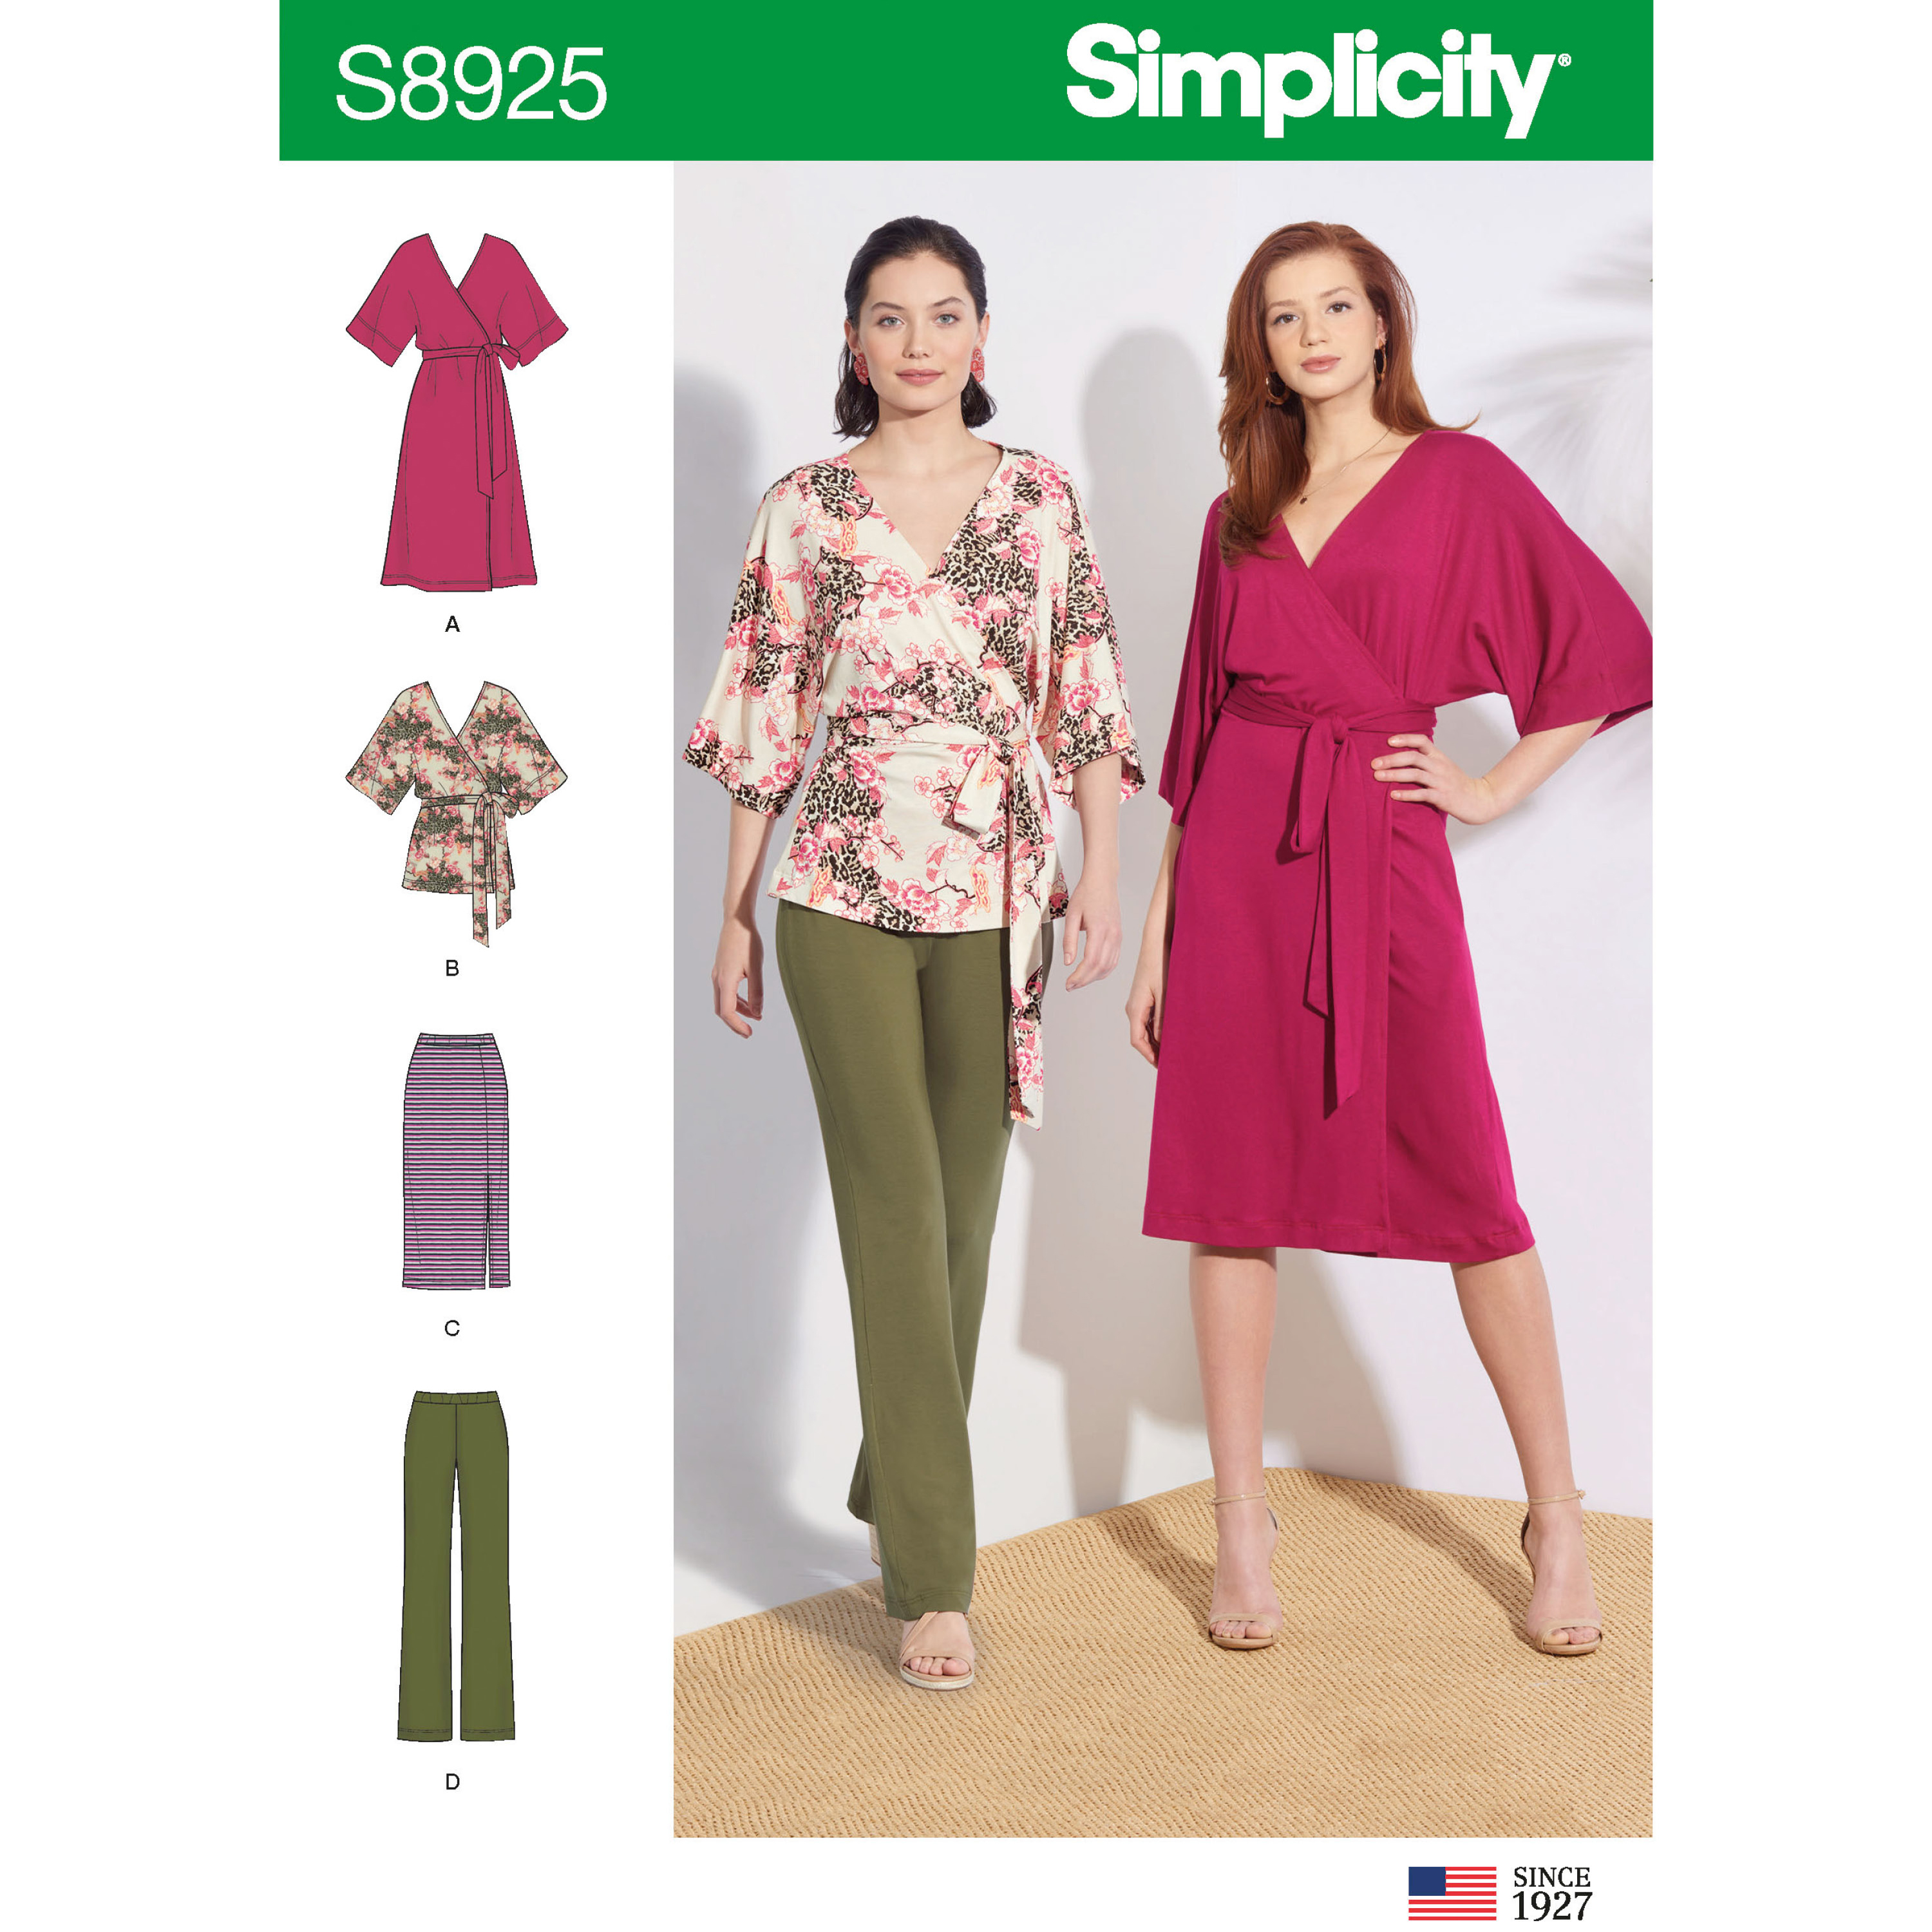 Simplicity Misses' Wrap Dress Sewing Pattern S9224 Size 6-8-10-12-14 